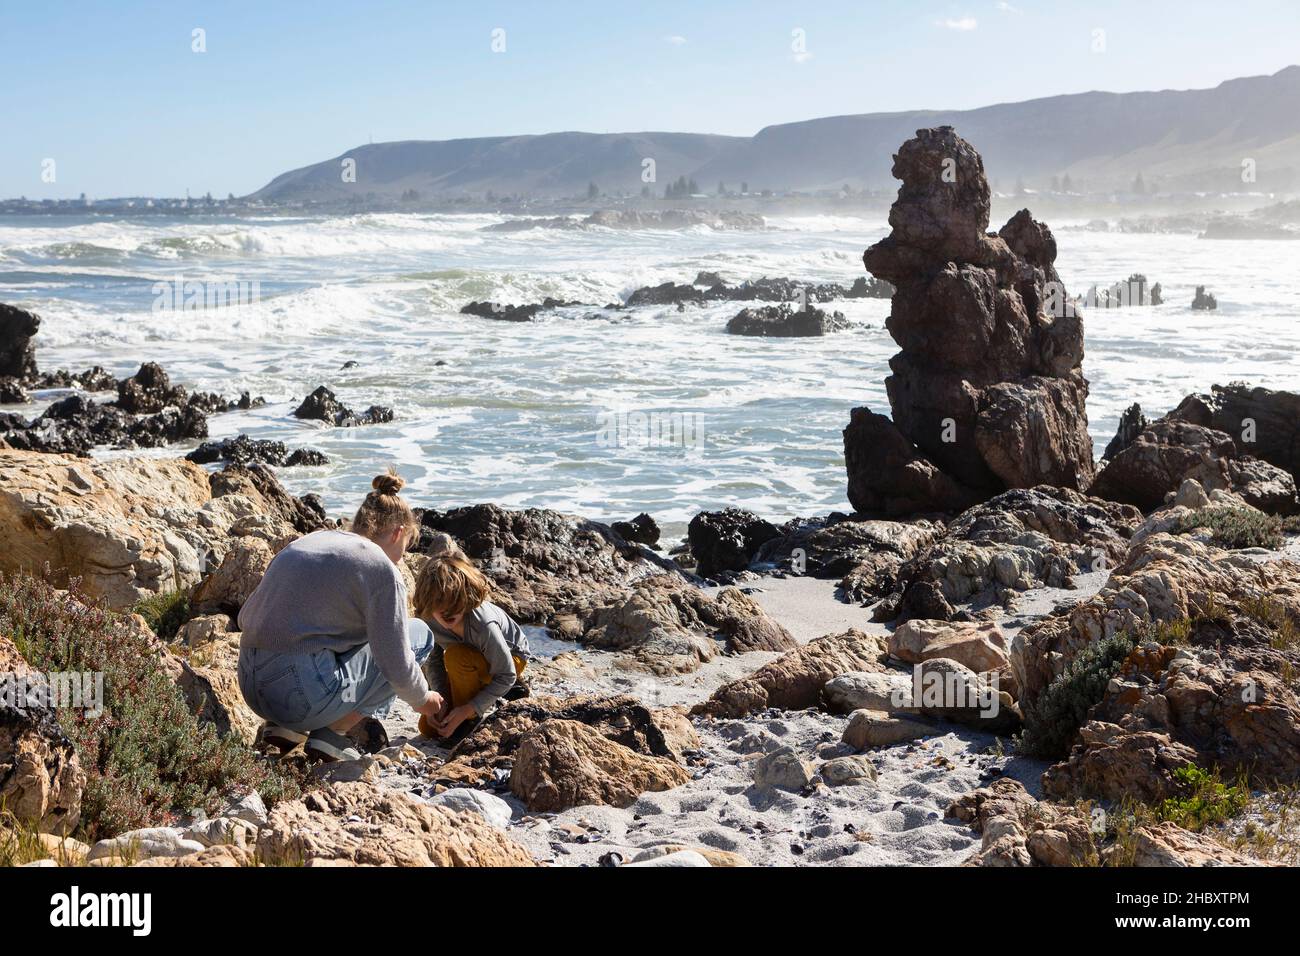 Teenage girl and a boy exploring the rocks and surf, sea fret rising off the breaking waves of the ocean. Stock Photo